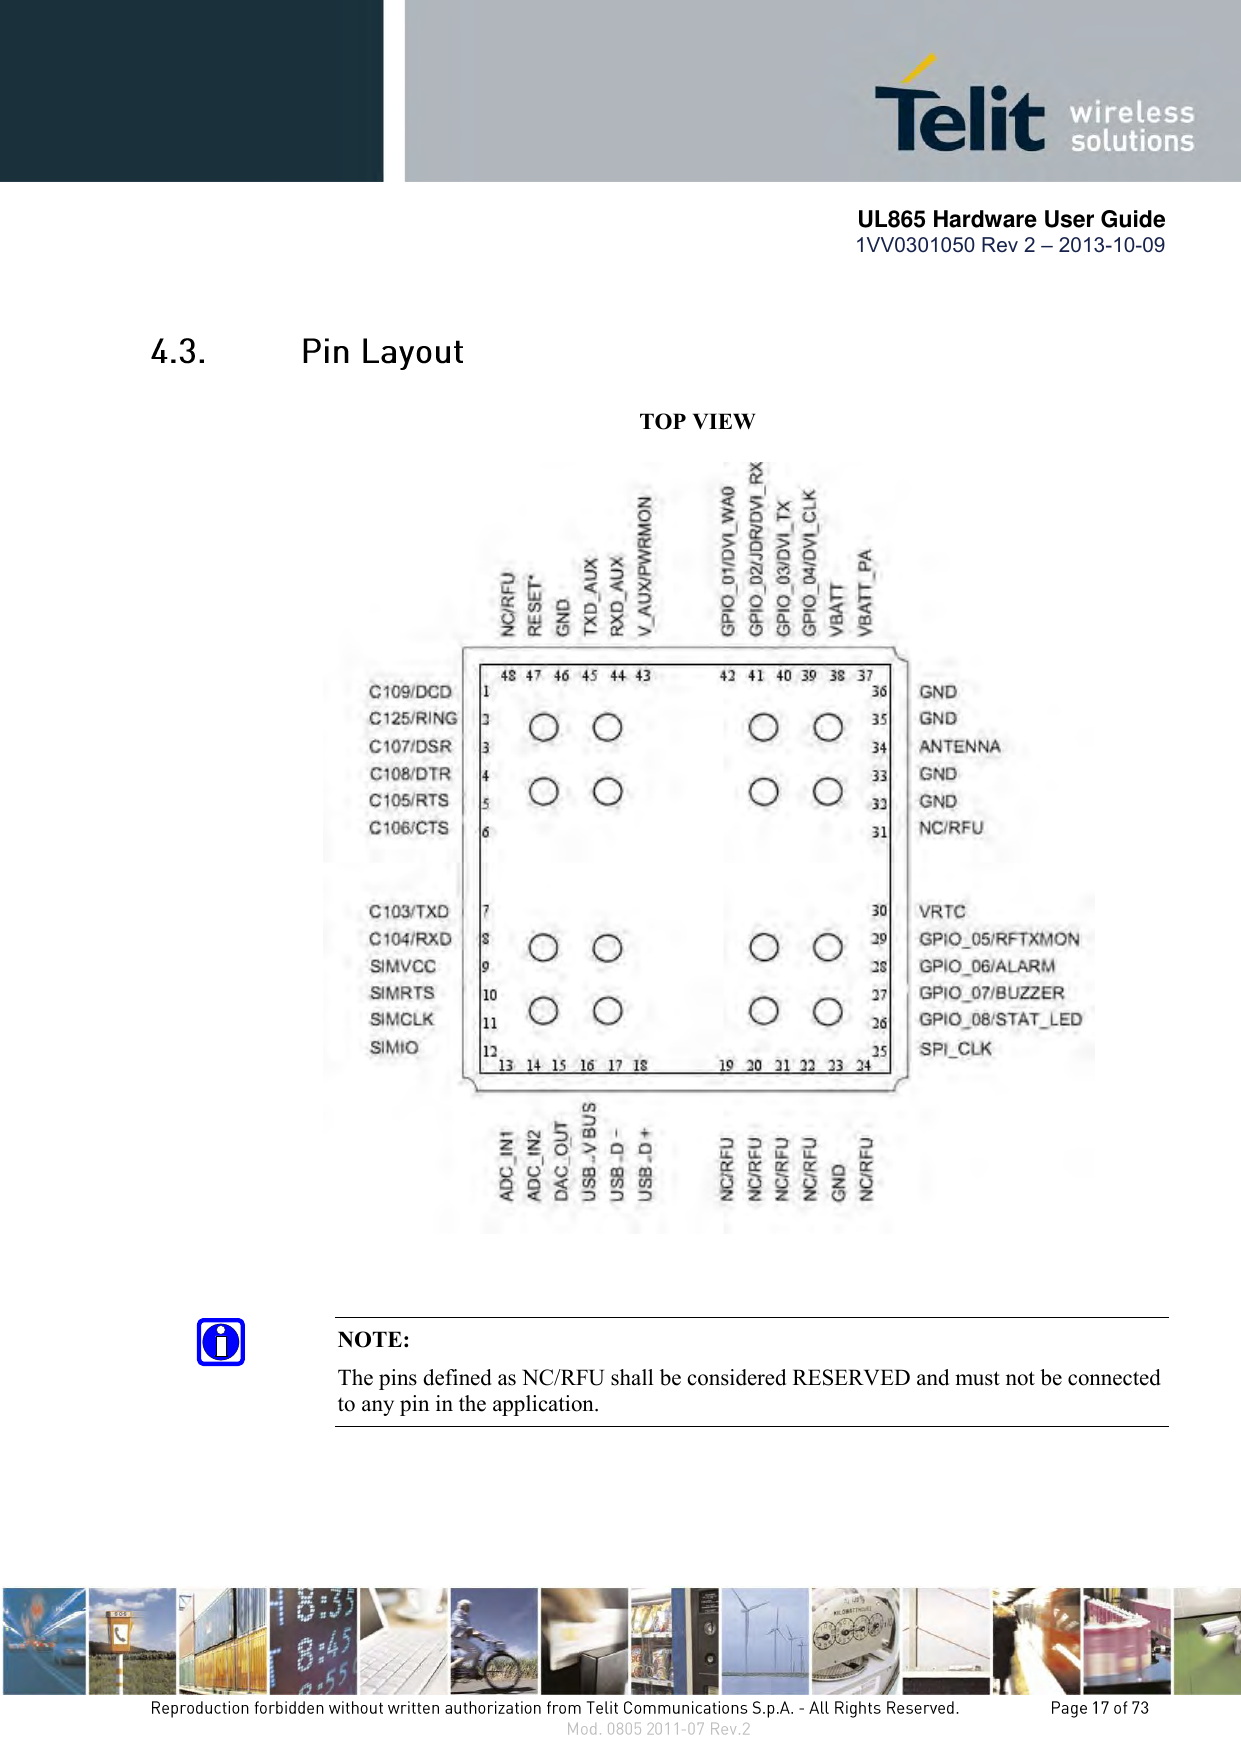       UL865 Hardware User Guide 1VV0301050 Rev 2 – 2013-10-09             TOP VIEW                                  NOTE: The pins defined as NC/RFU shall be considered RESERVED and must not be connected to any pin in the application. 